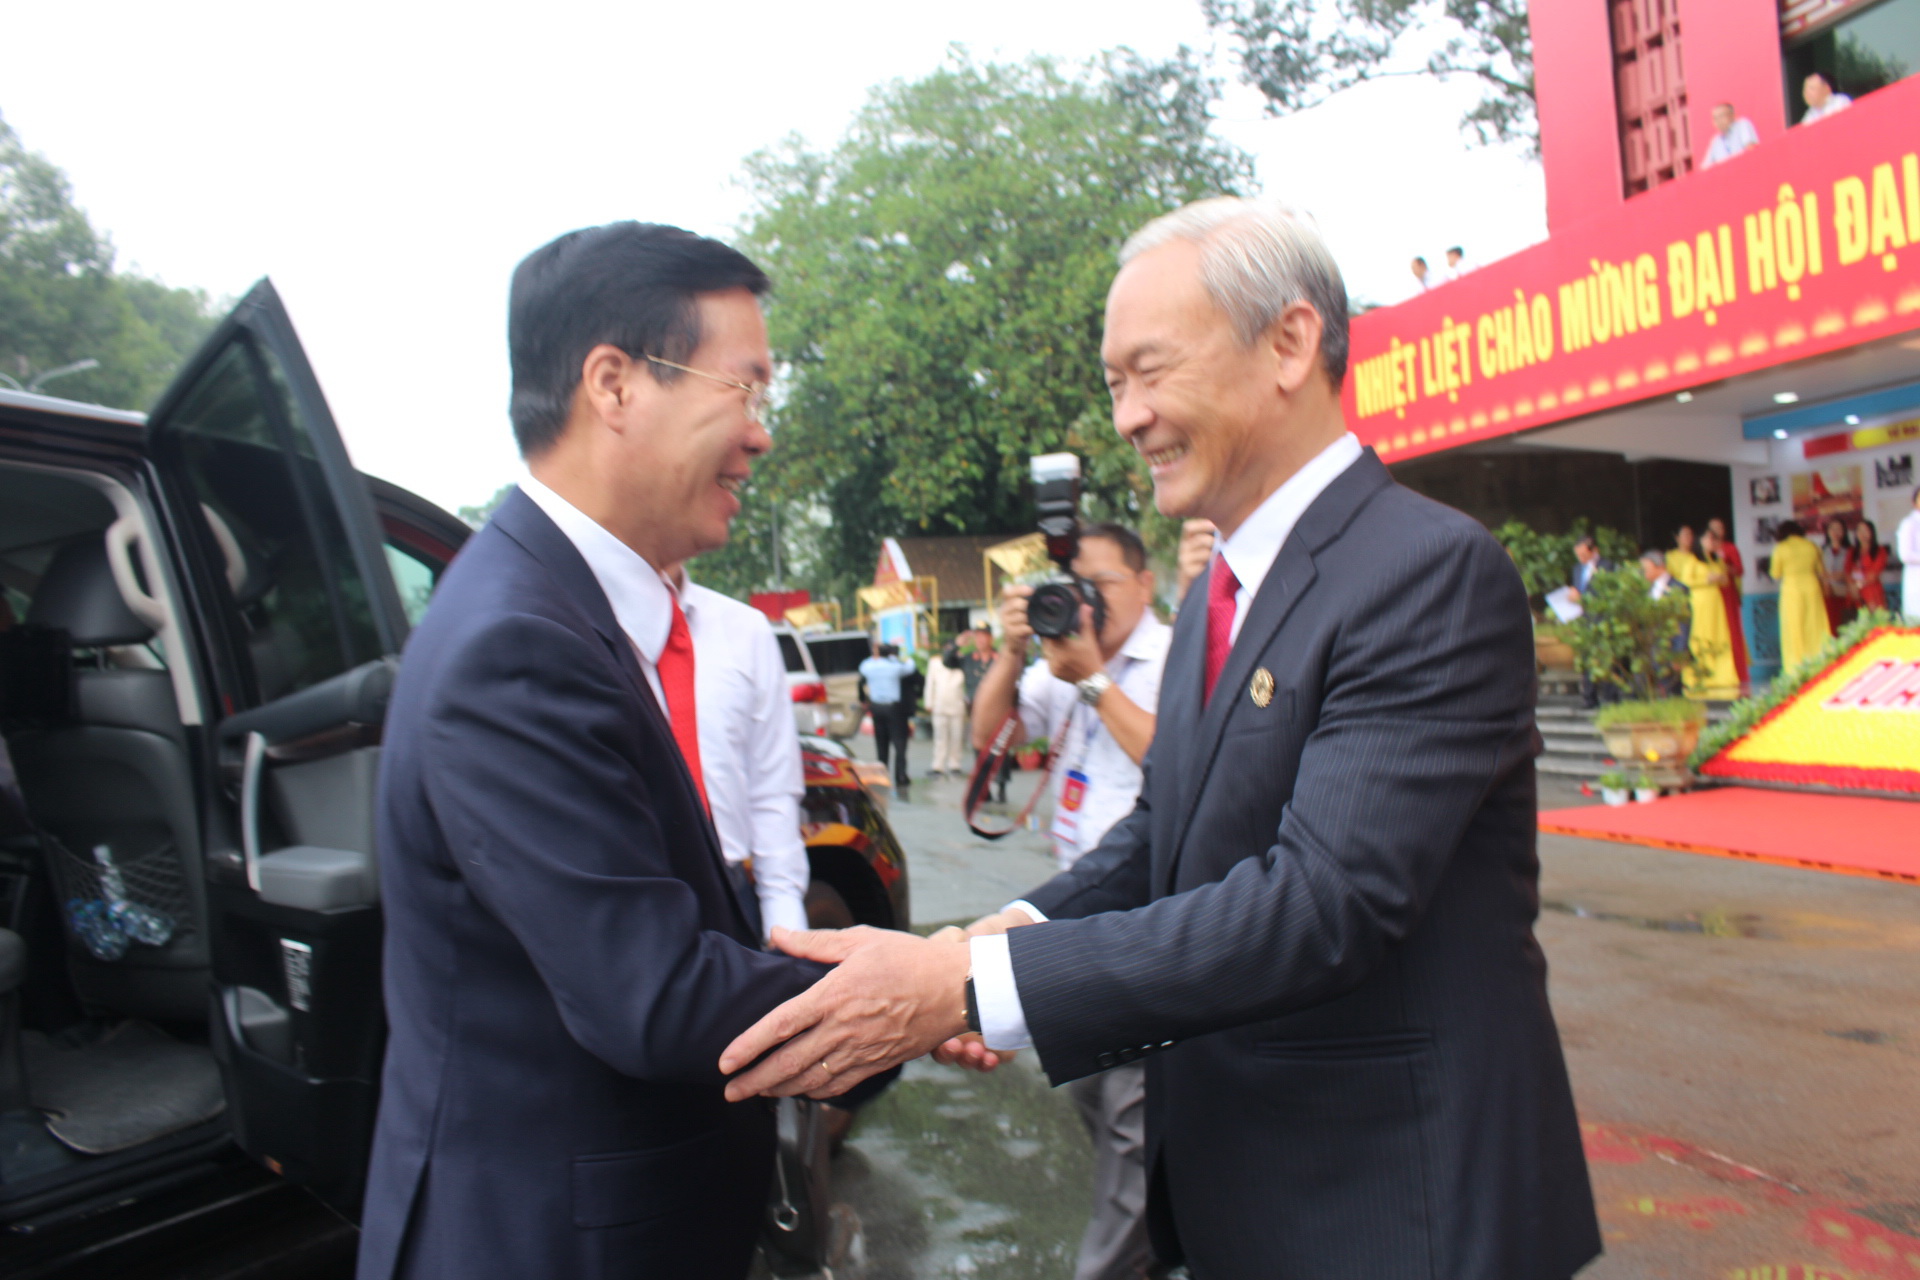 Secretary of Dong Nai provincial Party Committee Nguyen Phu Cuong welcomes Secretary of the Communist Party of Vietnam Central Committee Vo Van Thuong to the event 